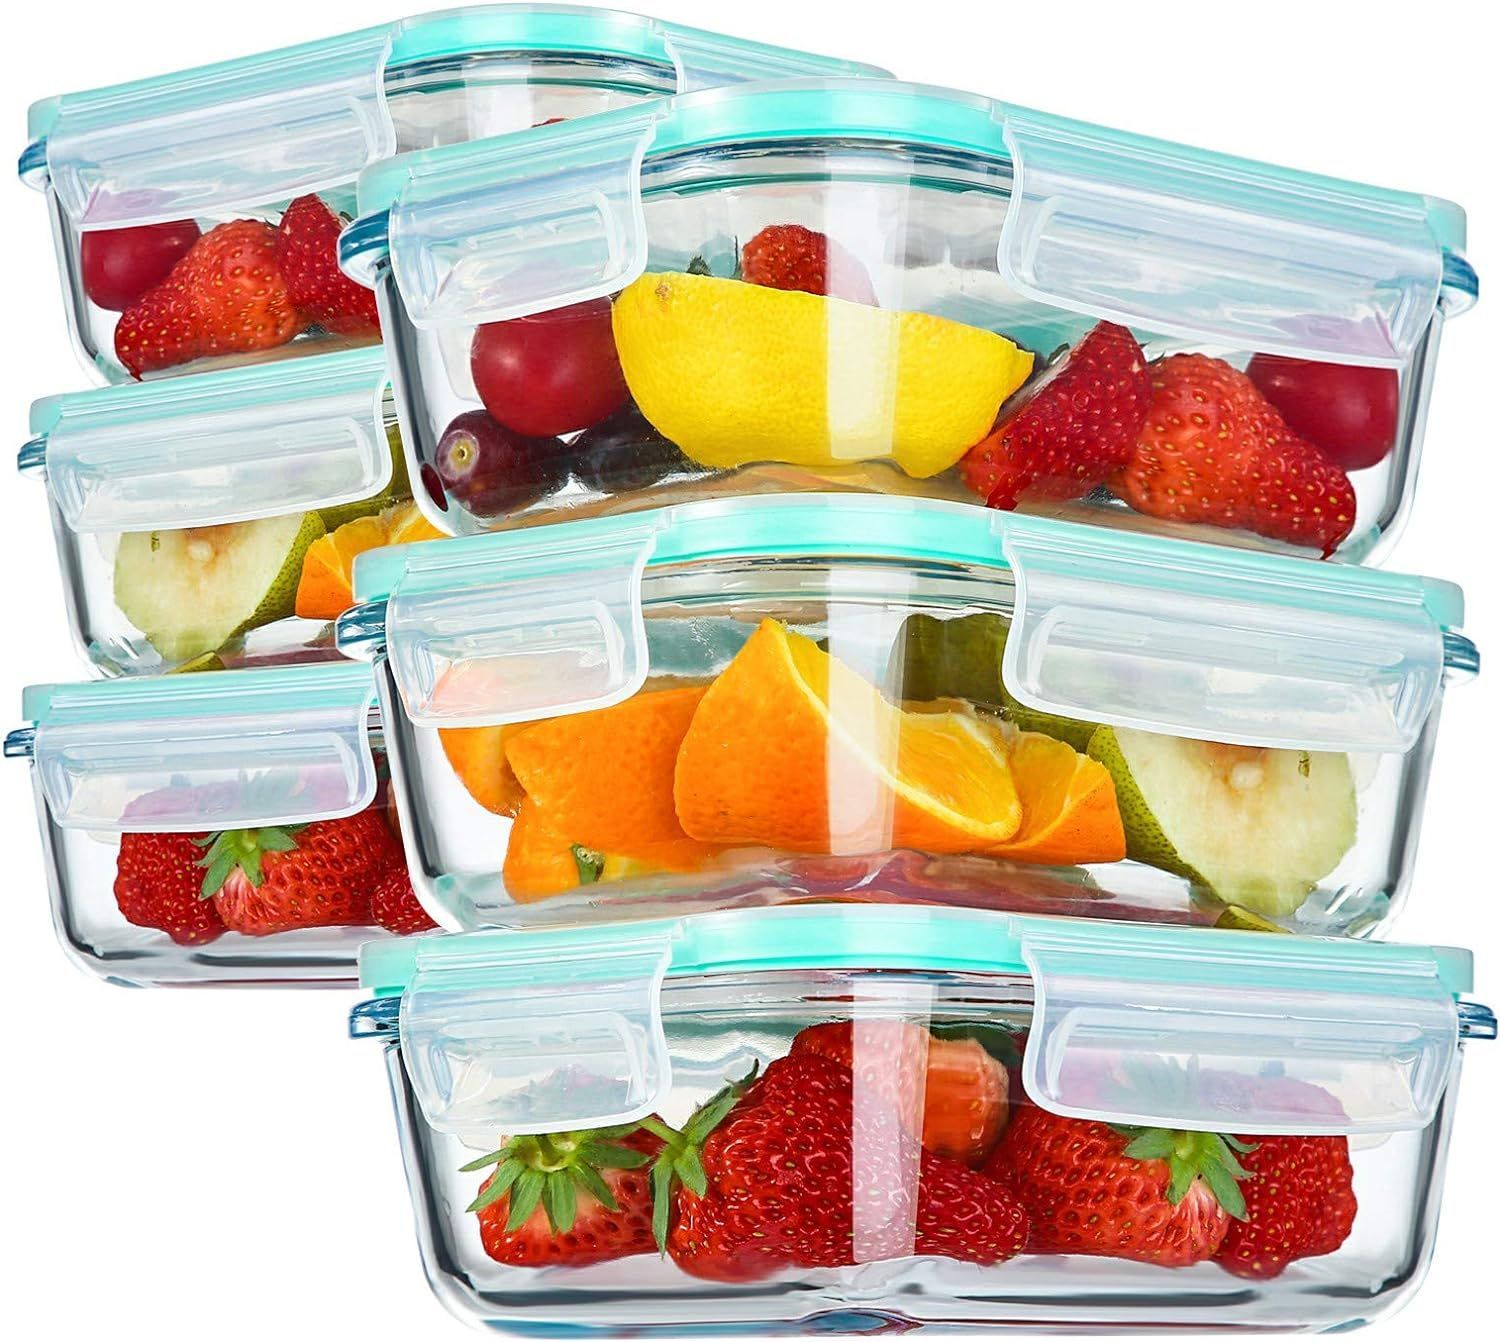 Yeboda Meal Prep Container Set